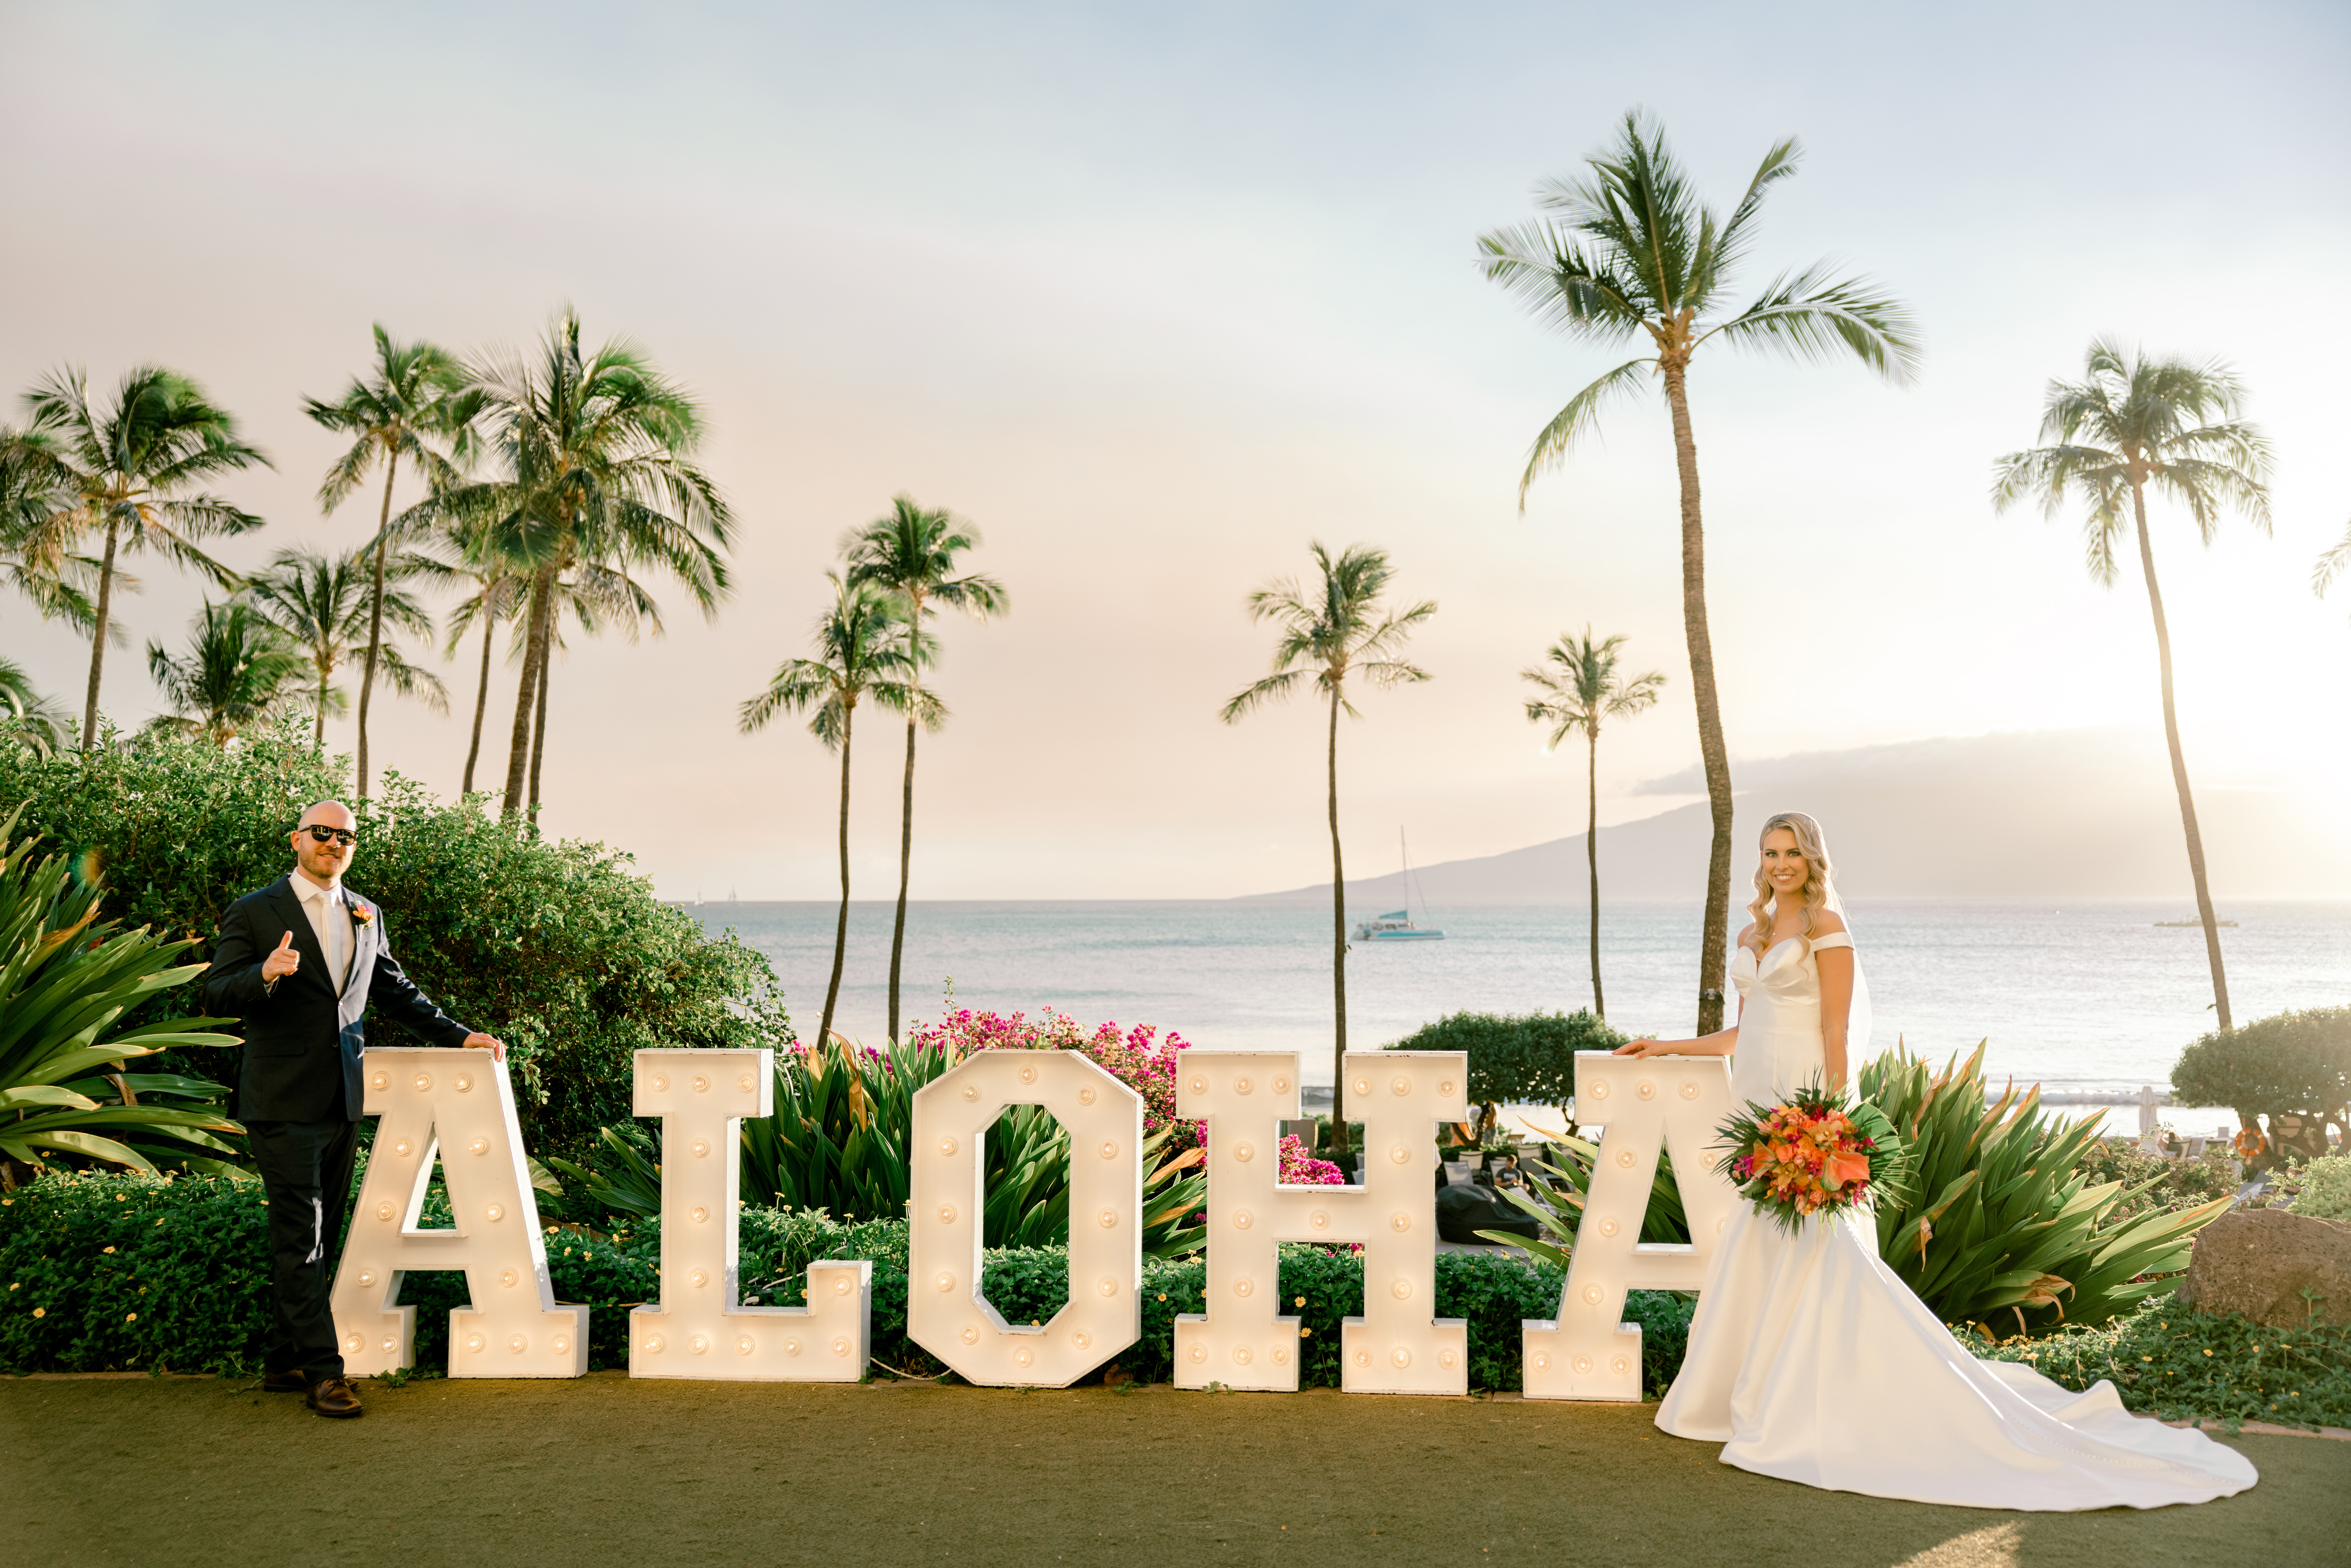 Bride and groom standing in front of the Maui Hyatt's ALOHA sign with palm trees in the background